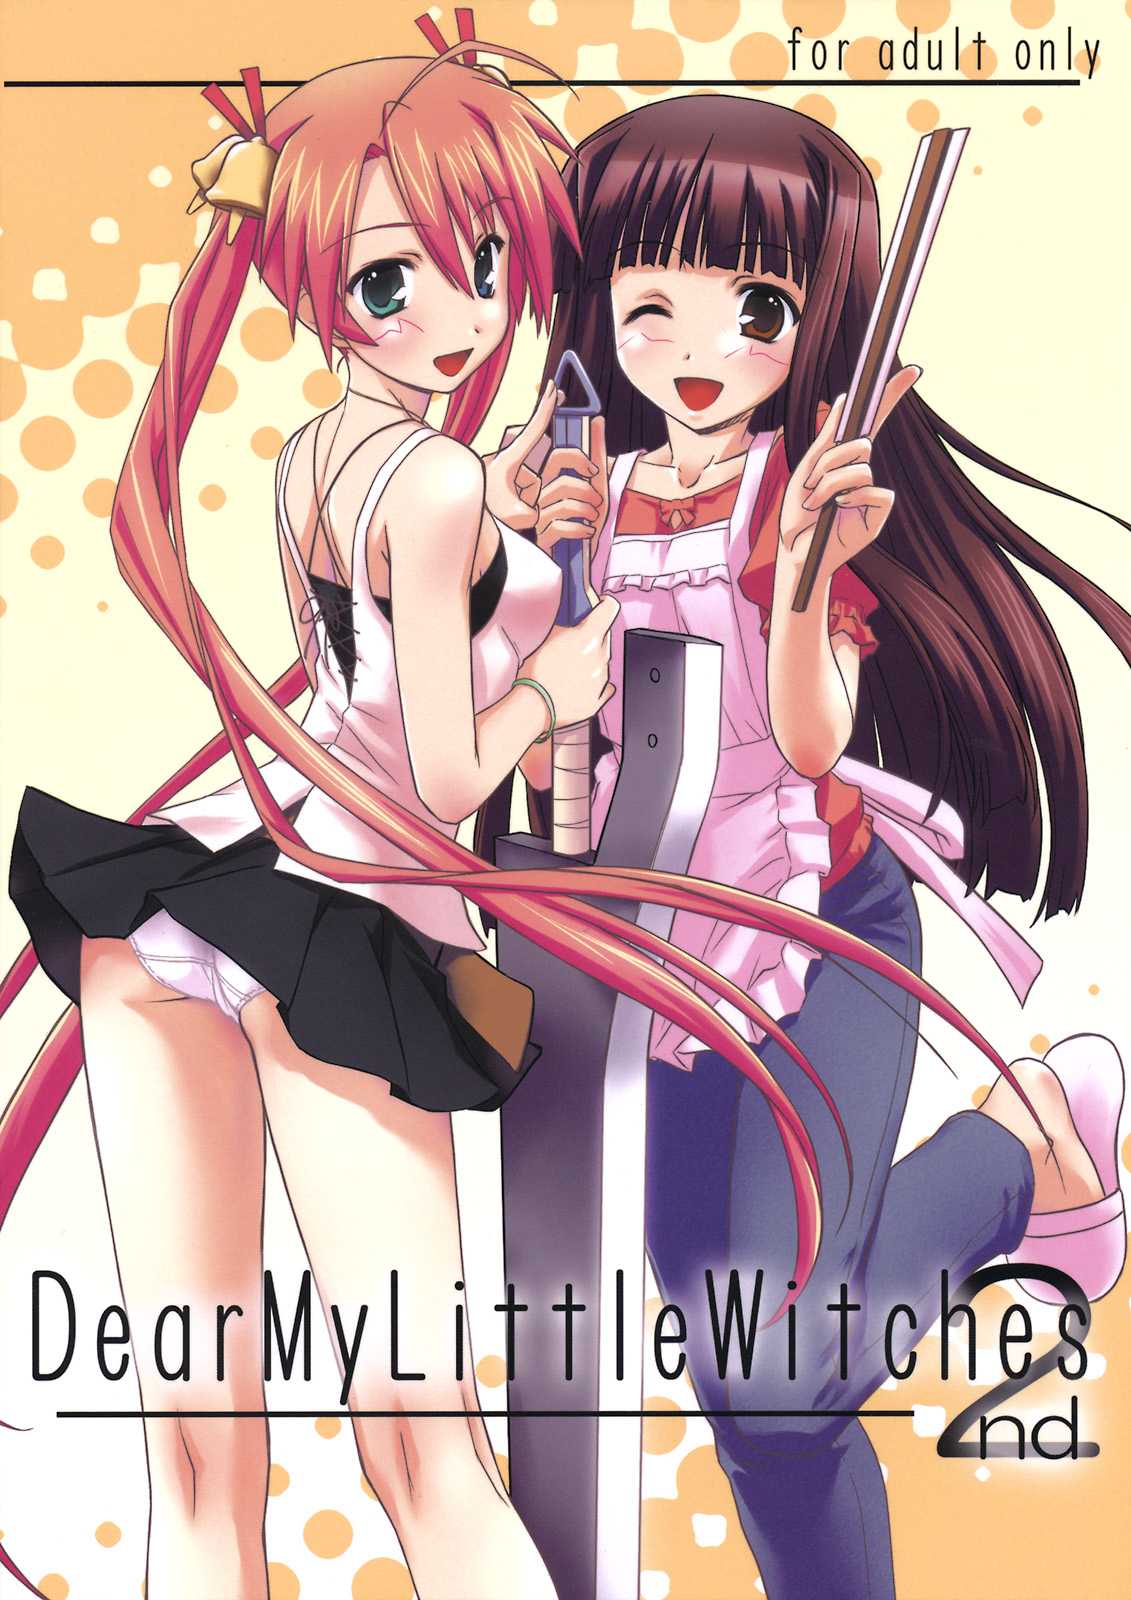 [BLUE WAVE] Dear my little witches 2nd (negima) 